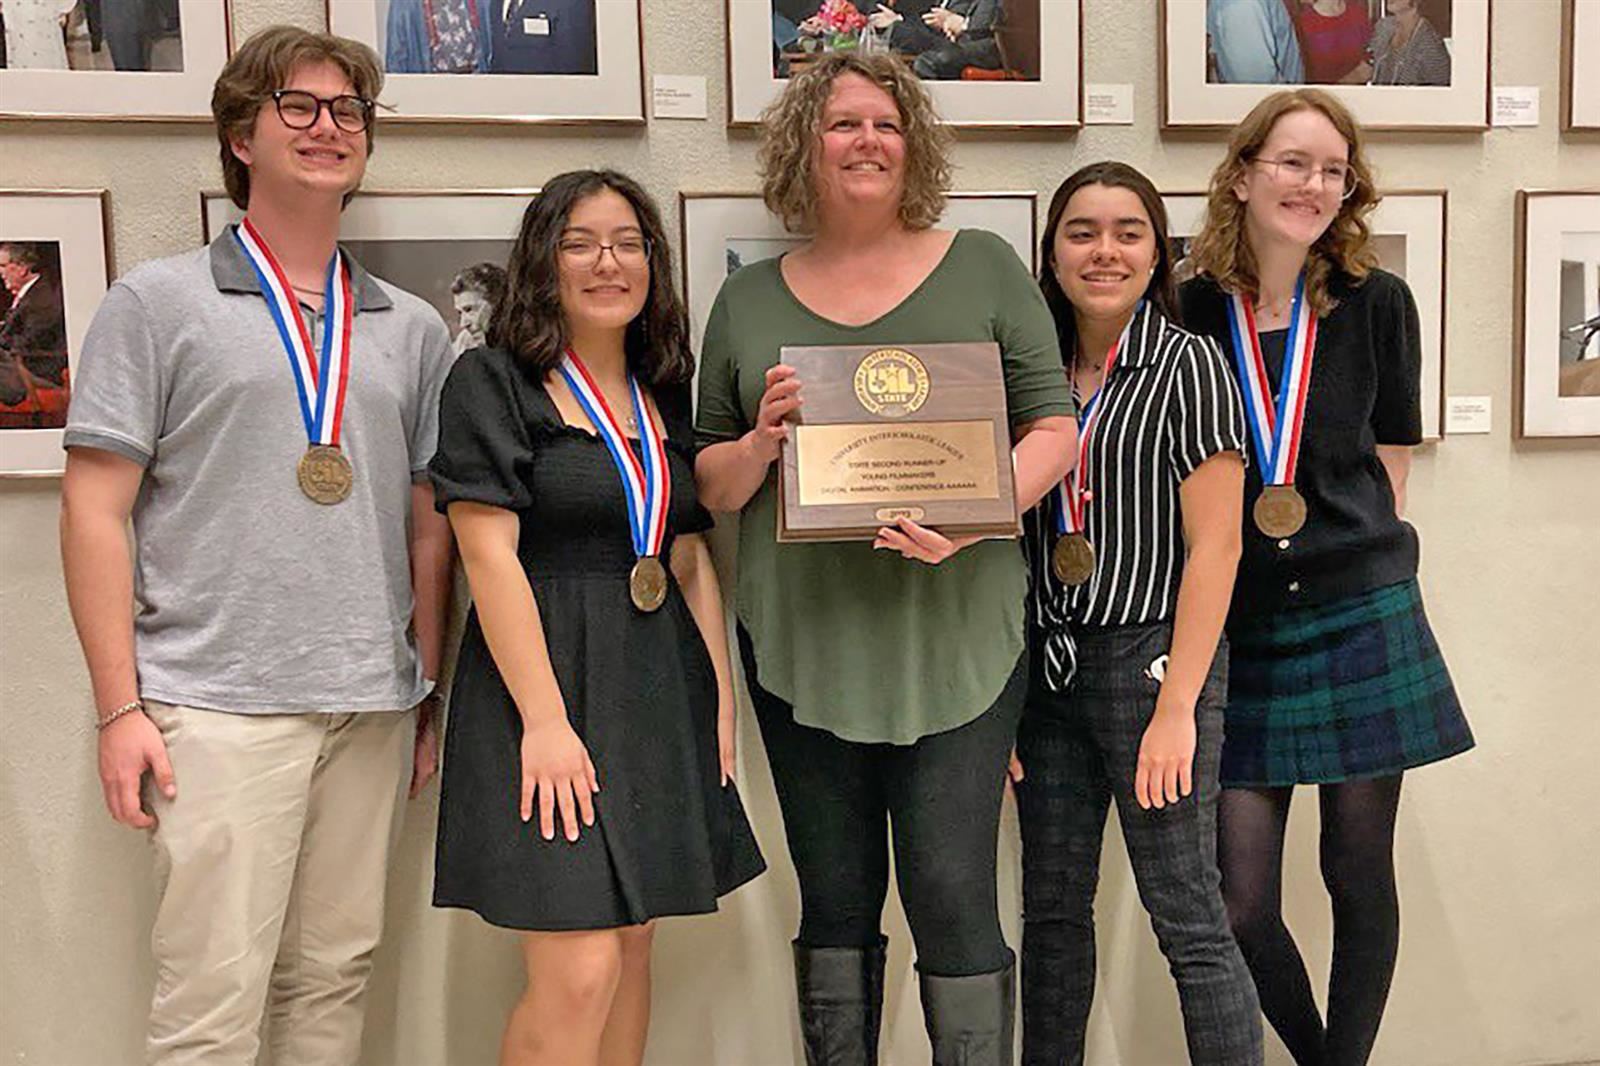 Cypress Woods High School seniors, from left, Cameron Wallace, Abby Hernandez, Nicole Guzman and Elise Marosek placed third.